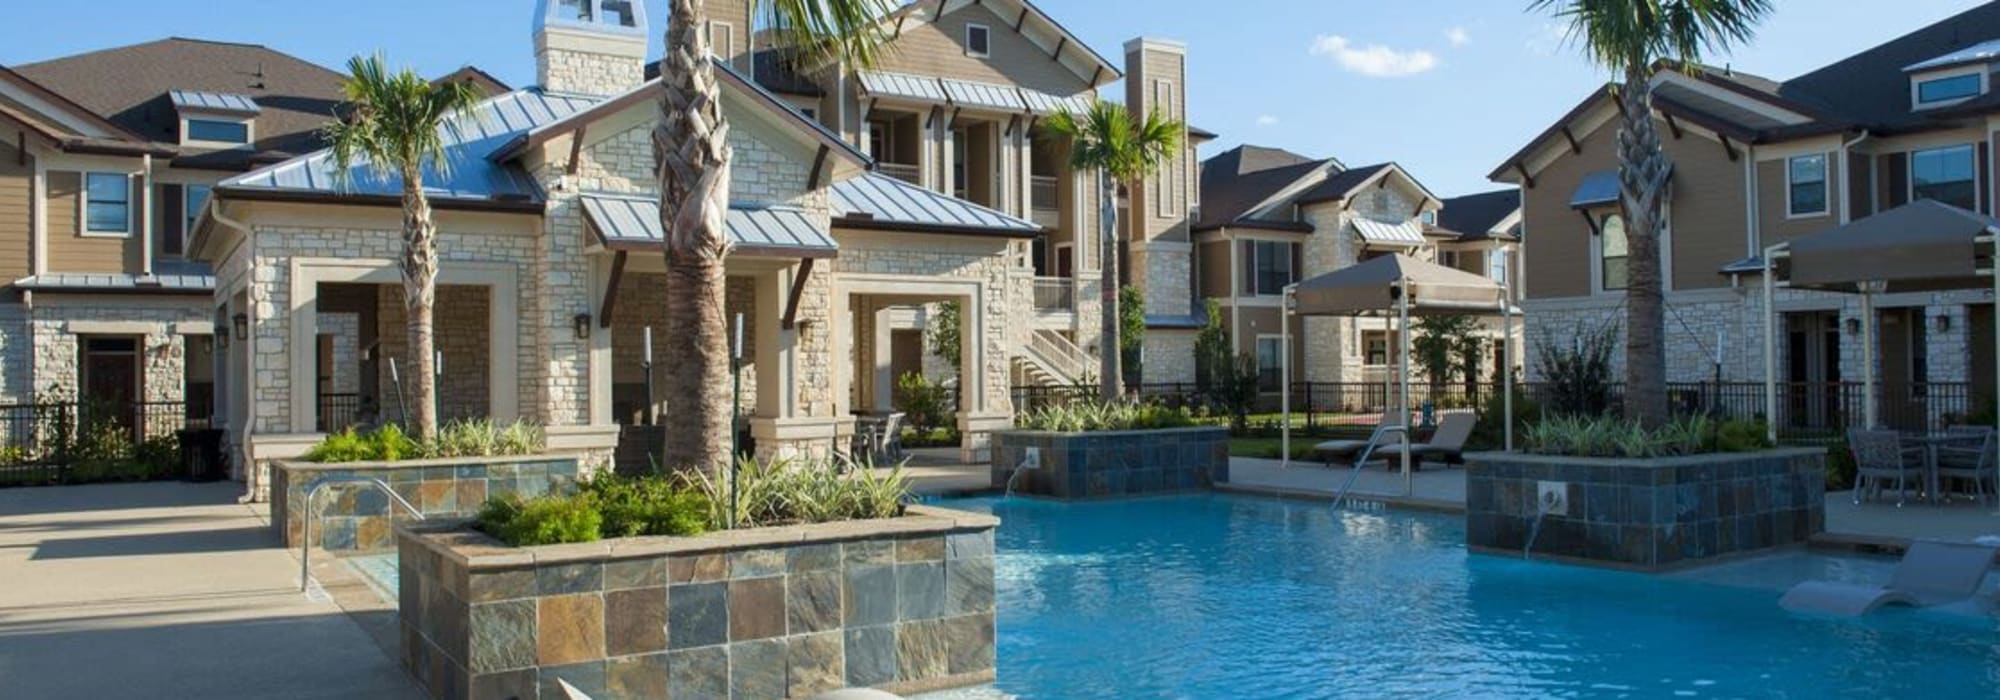 Pool with palm trees at The Crossing at Katy Ranch in Katy, Texas